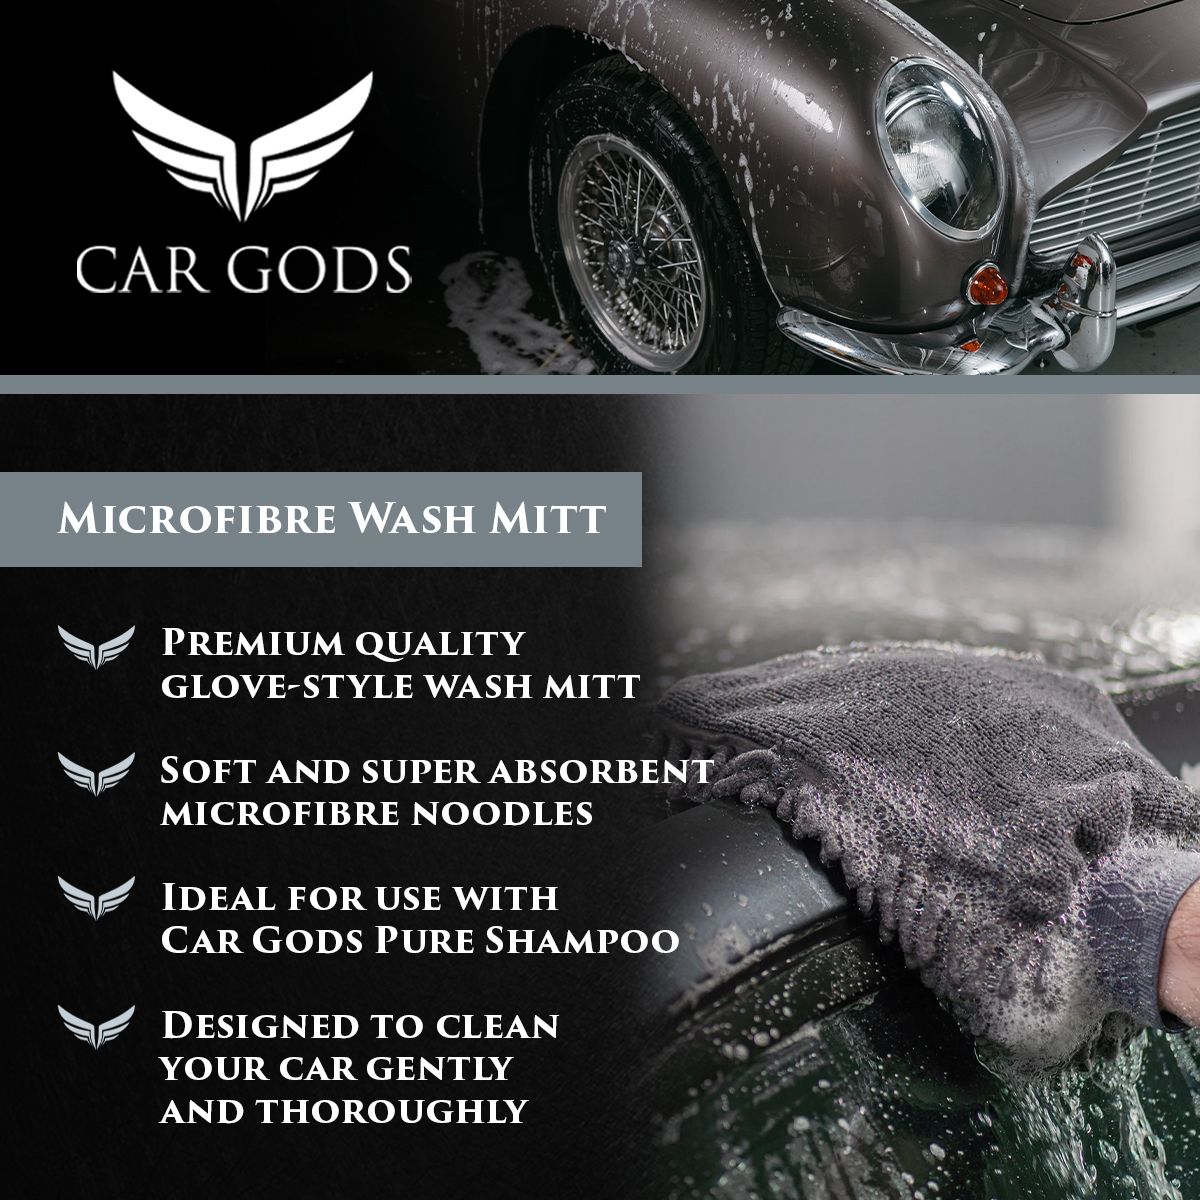 Car Gods Microfibre Wash Mitt. Soft and super absorbent premium quality microfibre glove-style wash mitt. The microfibre noodles are designed to clean your car gently and thoroughly. The wash mitt is ideal for use with Car Gods Pure Shampoo.